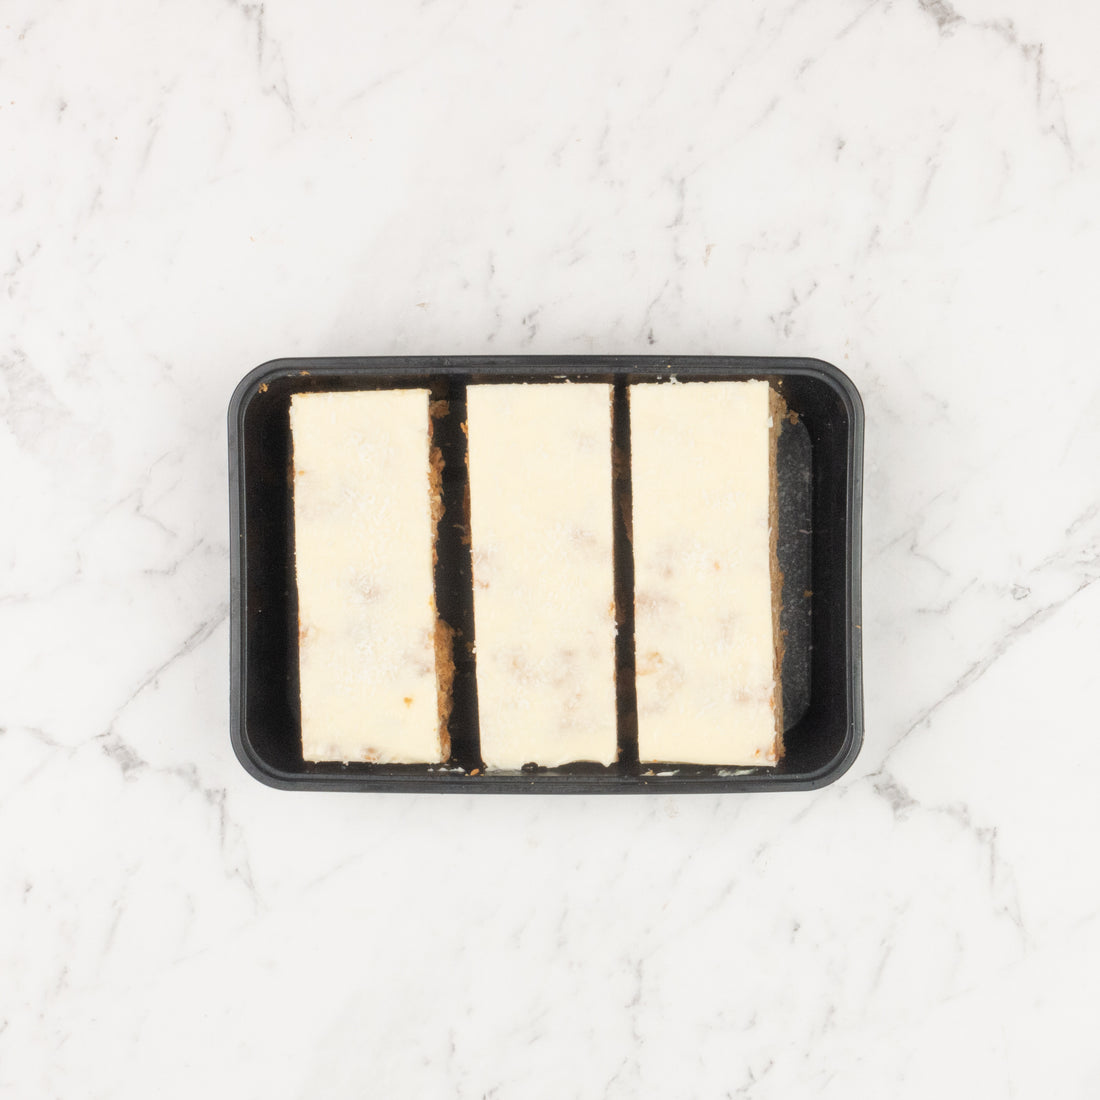 Apricot and Almond Oat Slice 3-Pack